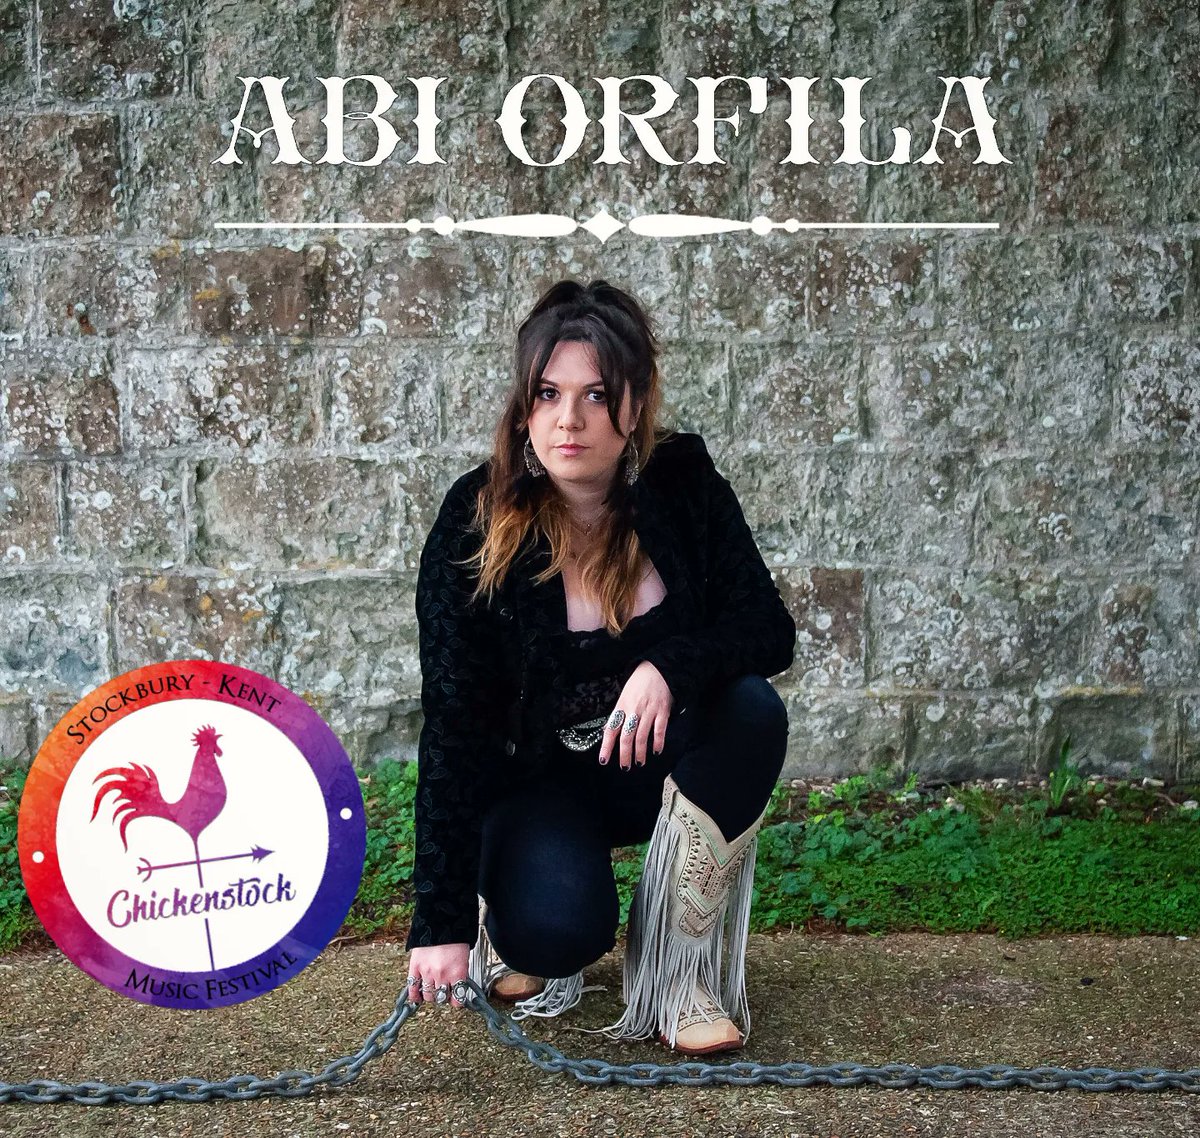 📣 EXCITING ANNOUNCEMENT!! 📣

I'm excited to announce I'll be joining the line up & performing on @chickenstockuk on Saturday 29th July 🤠🎉🎸🥳🎵

#chickenstockfestival 
#festival 
#abiorfila
#chickenstock
#musicfestival
#kentmusic
#countrymusician
#music
#countryartist